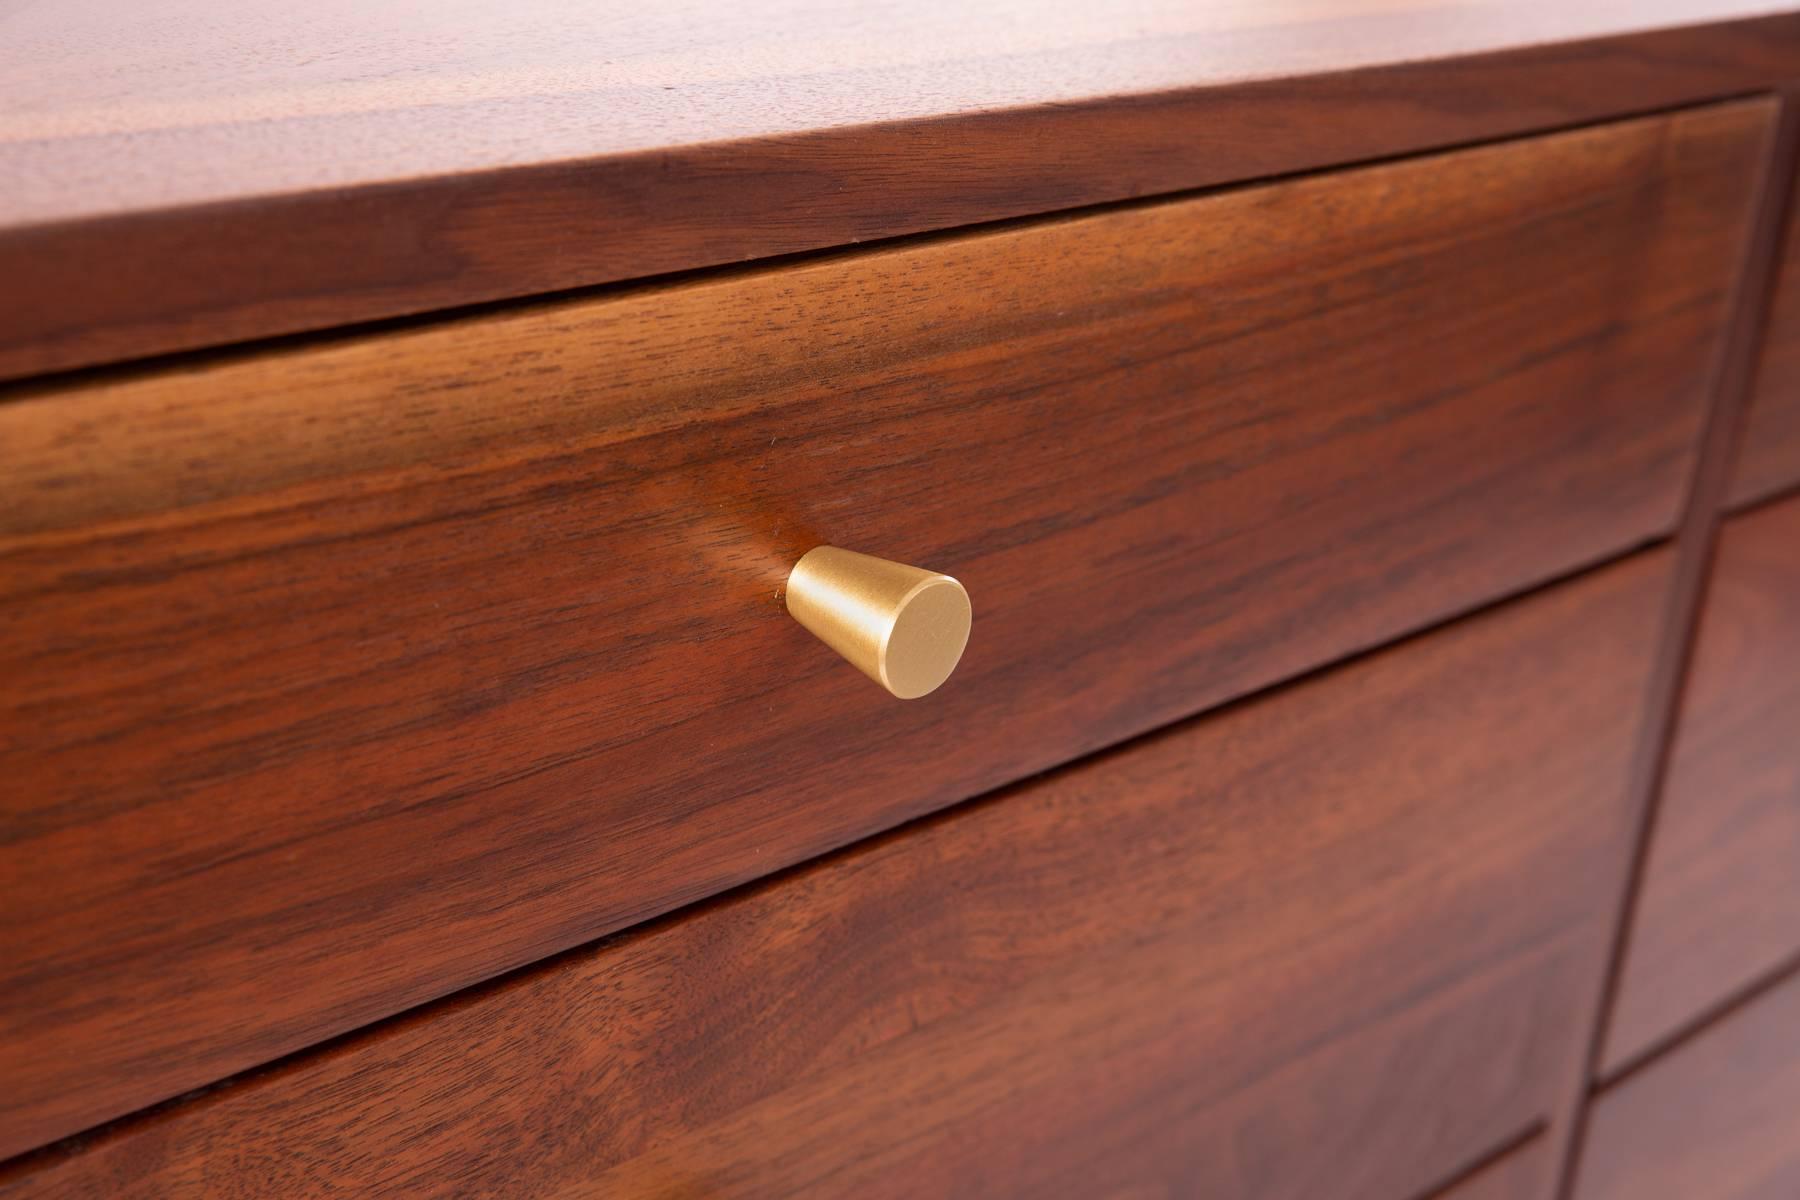 Solid walnut and brass 12-drawer dresser, circa late 1950s. This example has incredibly grained walnut with a large amount of sap grain. The drawer pulls are solid satin finished brass which highlight the walnut beautifully.